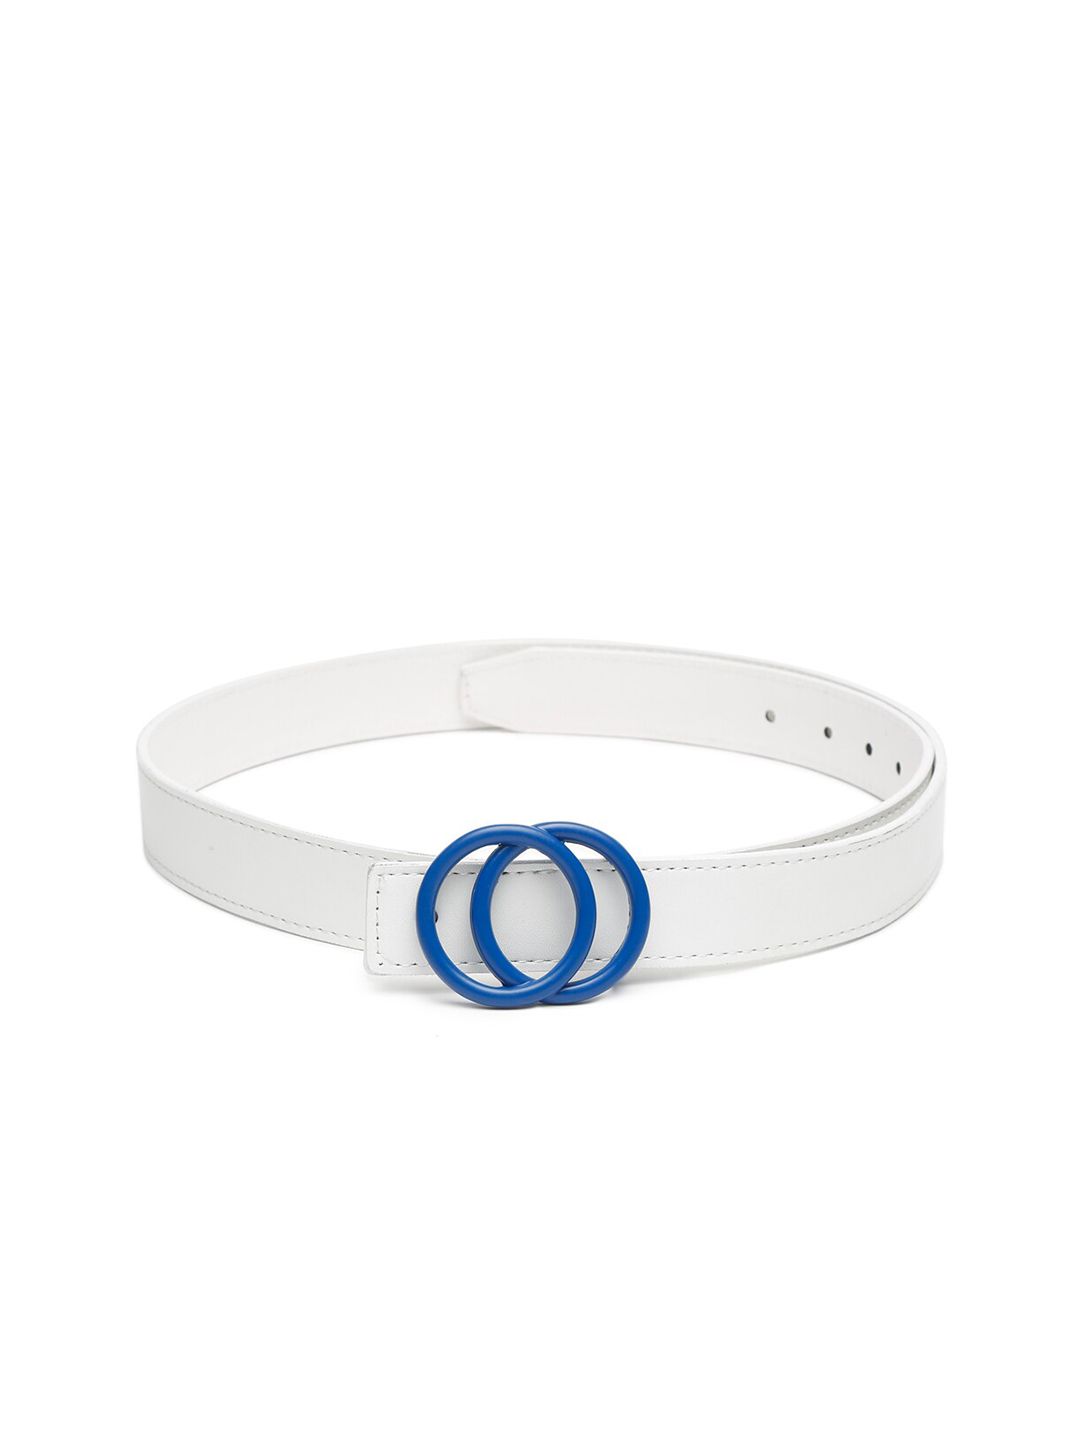 Apsis Women White Solid Belt Price in India